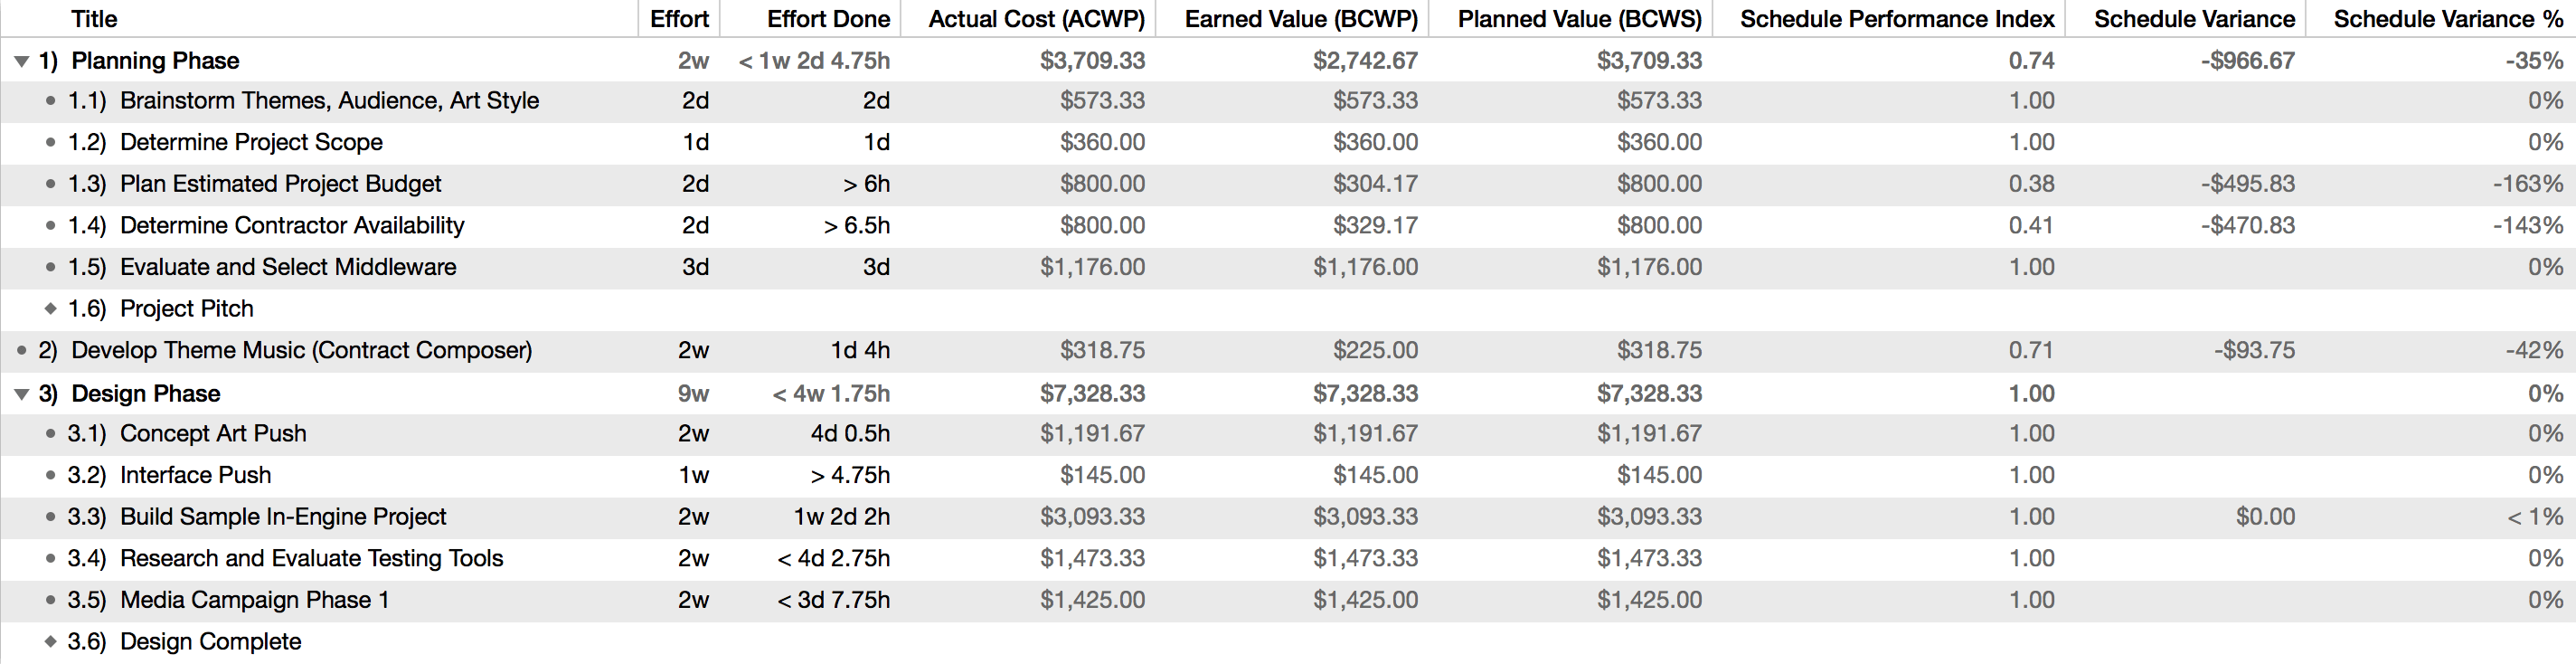 Earned Value Analysis columns related to schedule.